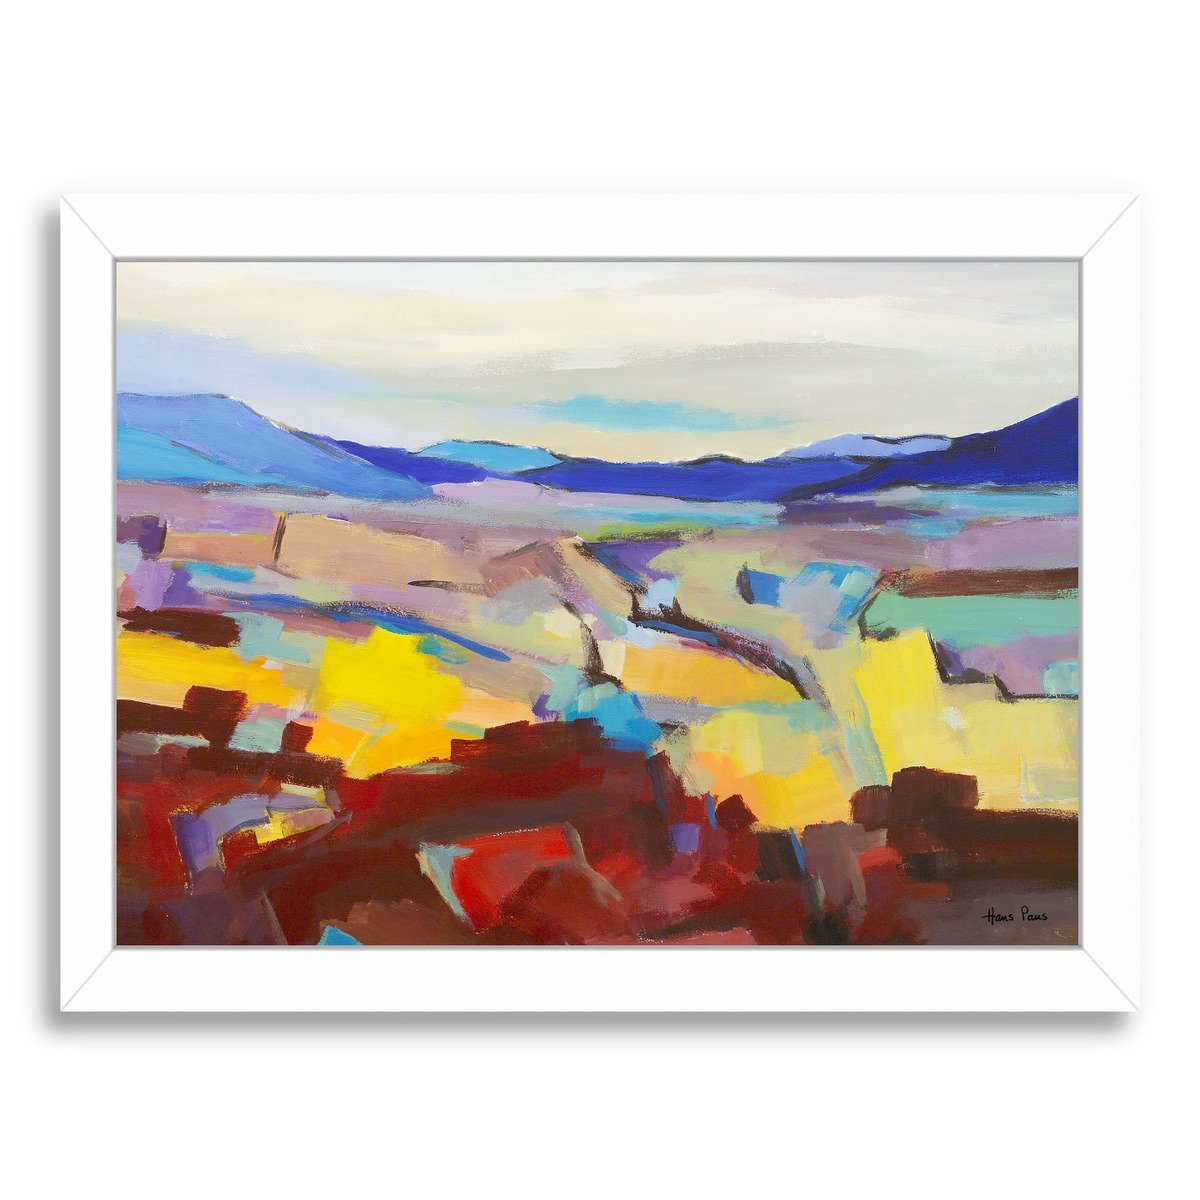 Abstract Landscape 4 By Hans Paus - Framed Print - Americanflat